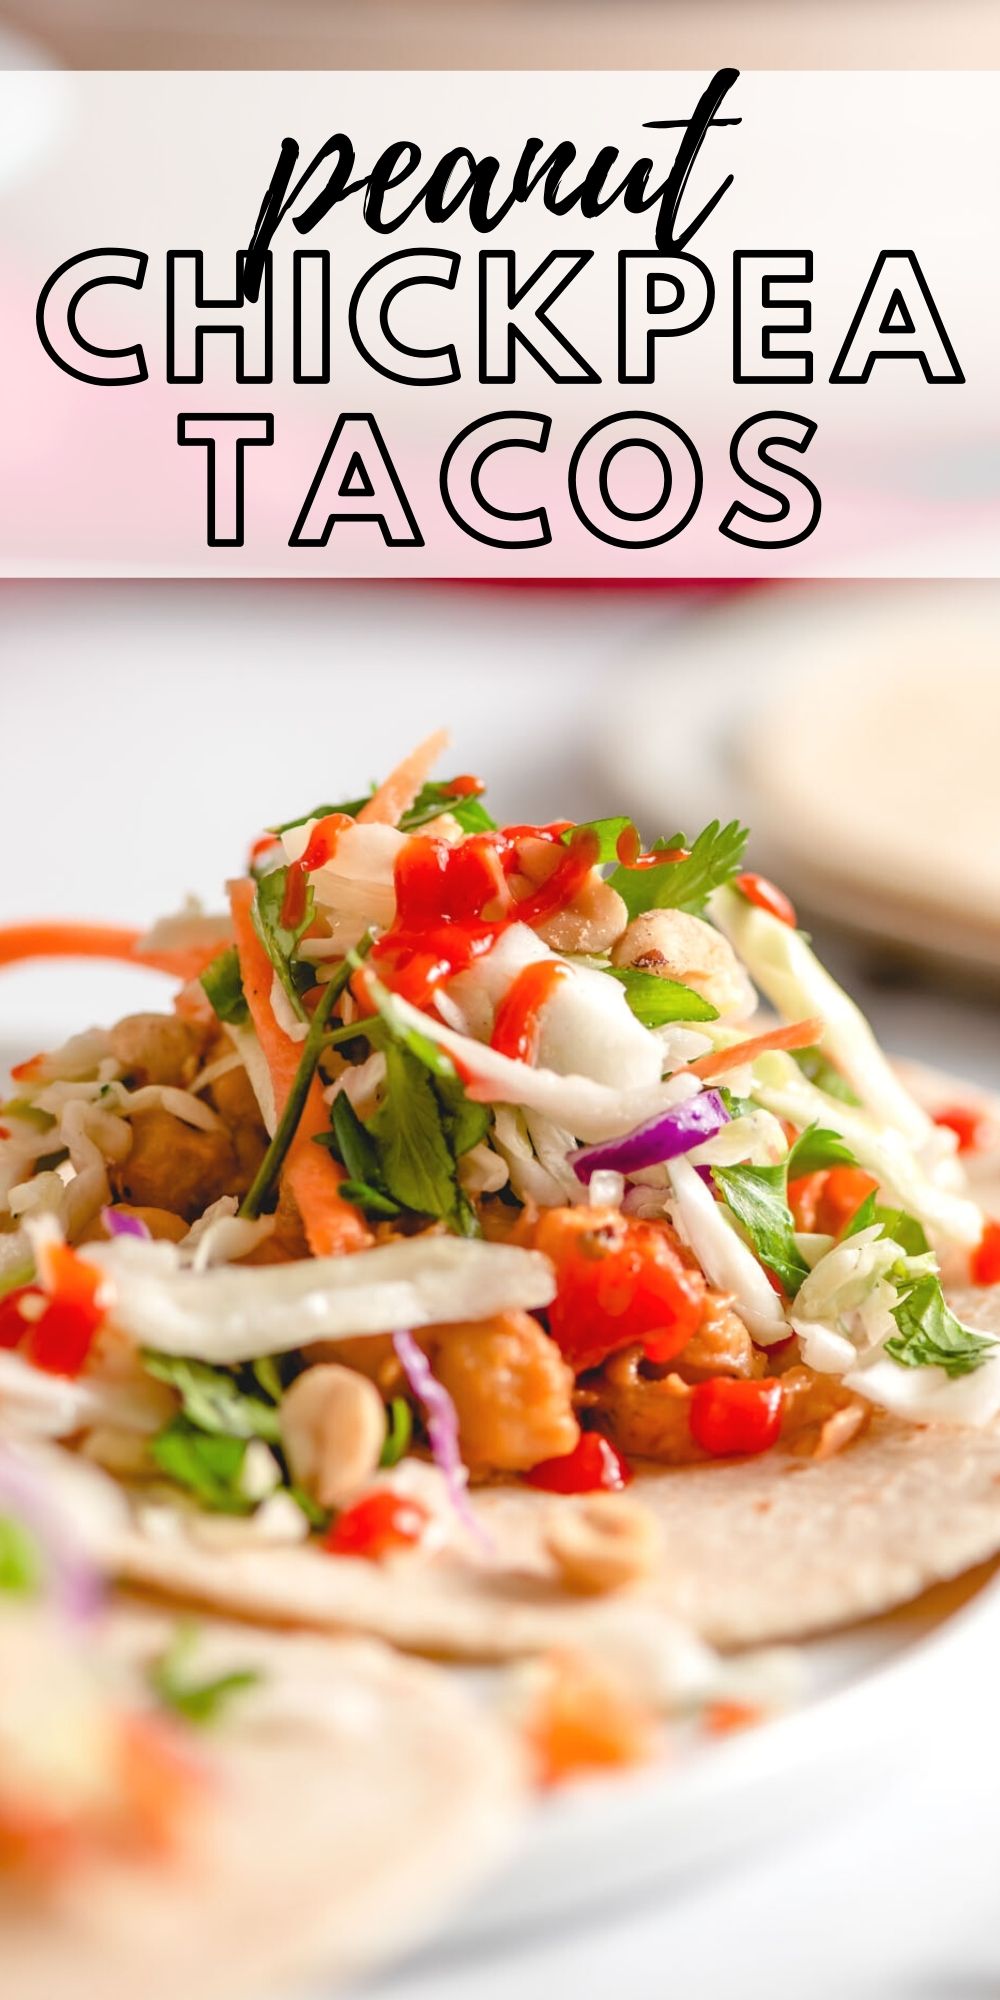 Pinterest graphic with an image and text for vegan chickpea peanut tacos.